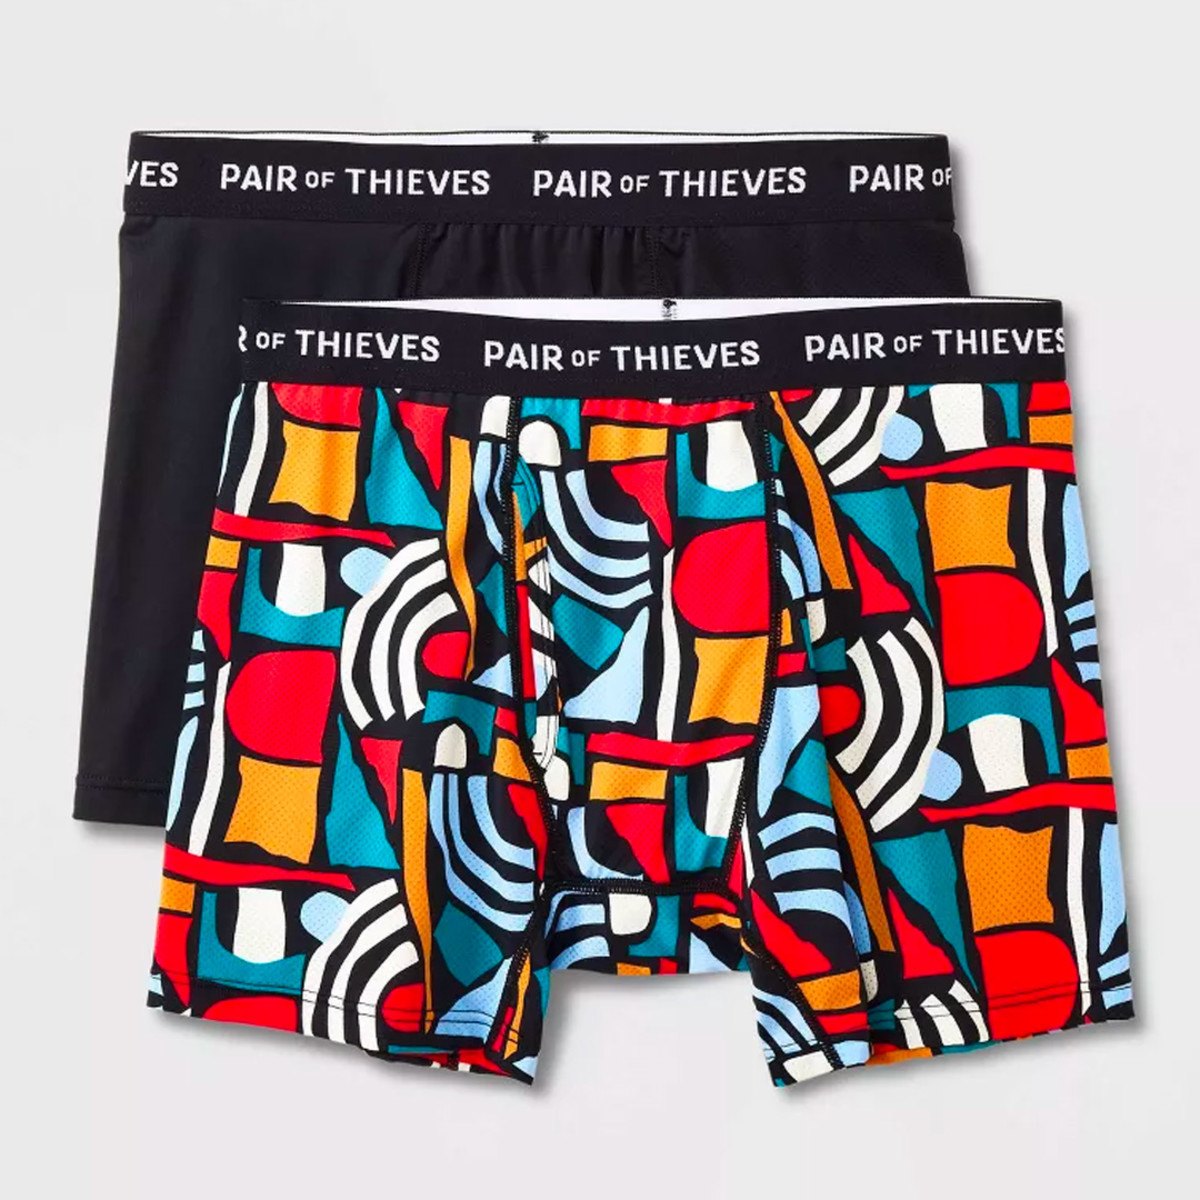 Target Shoppers Ditch Their Underwear for These Boxer Briefs - Men's Journal